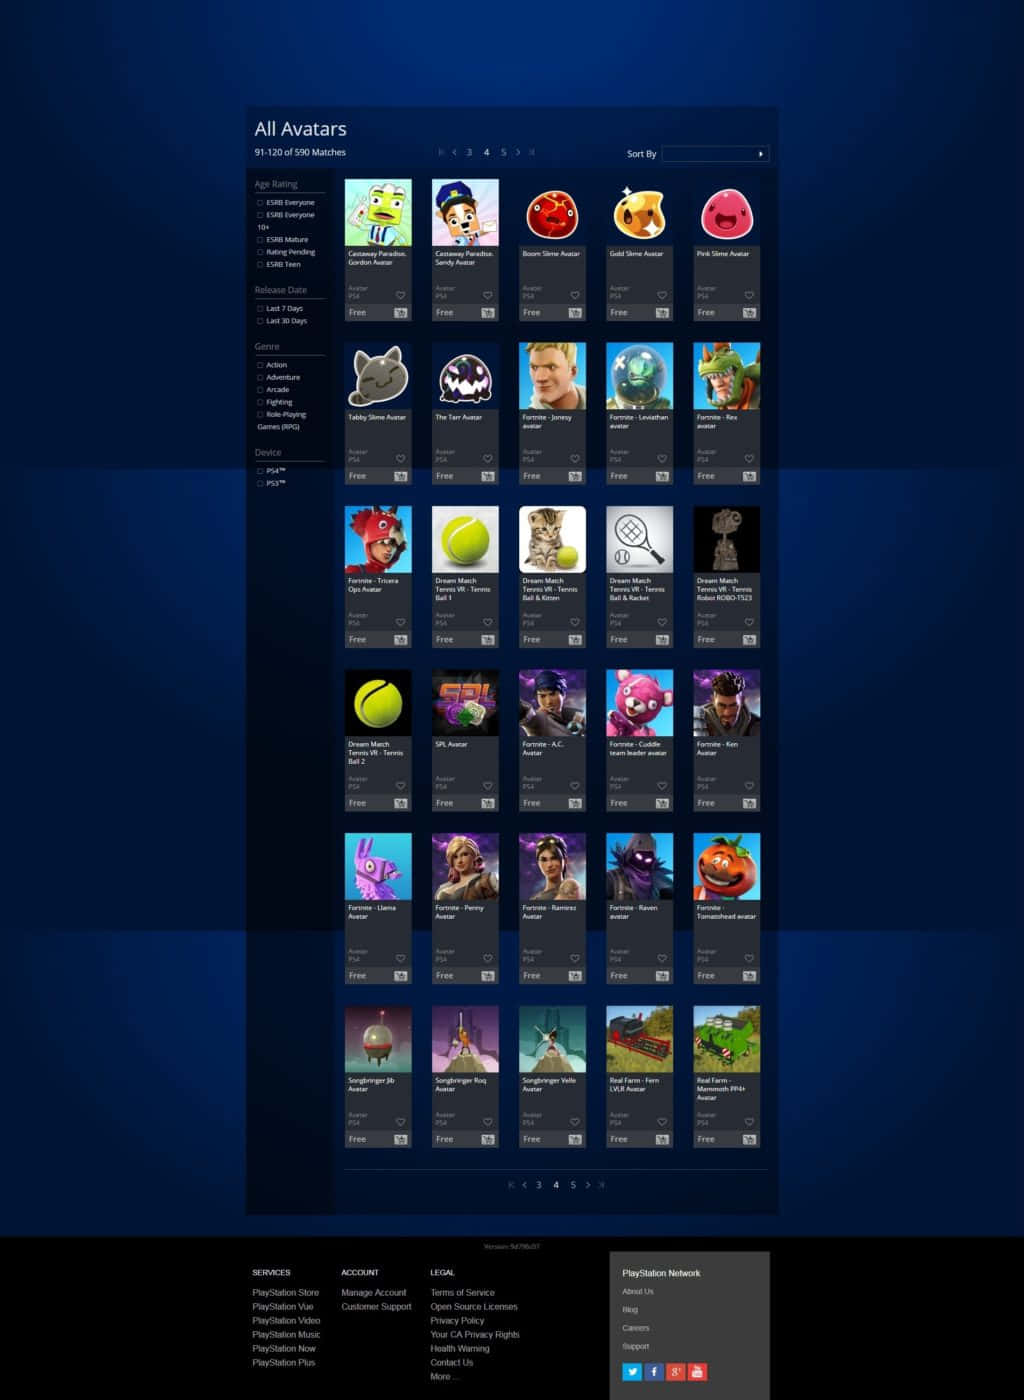 Get in the game with a Playstation Profile!